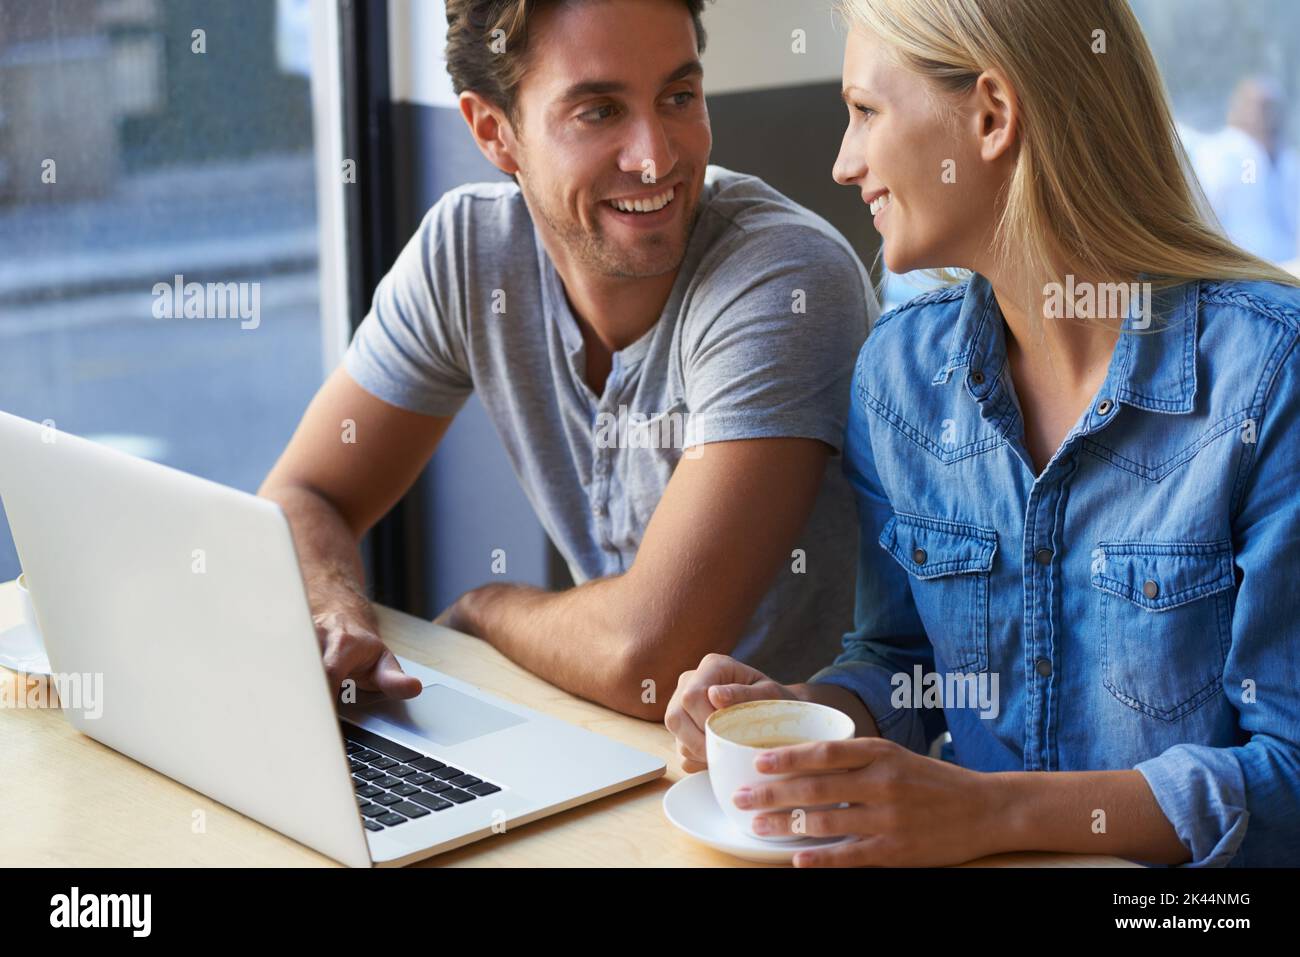 Cafe culture and technology. a young couple using a laptop in a cafe. Stock Photo